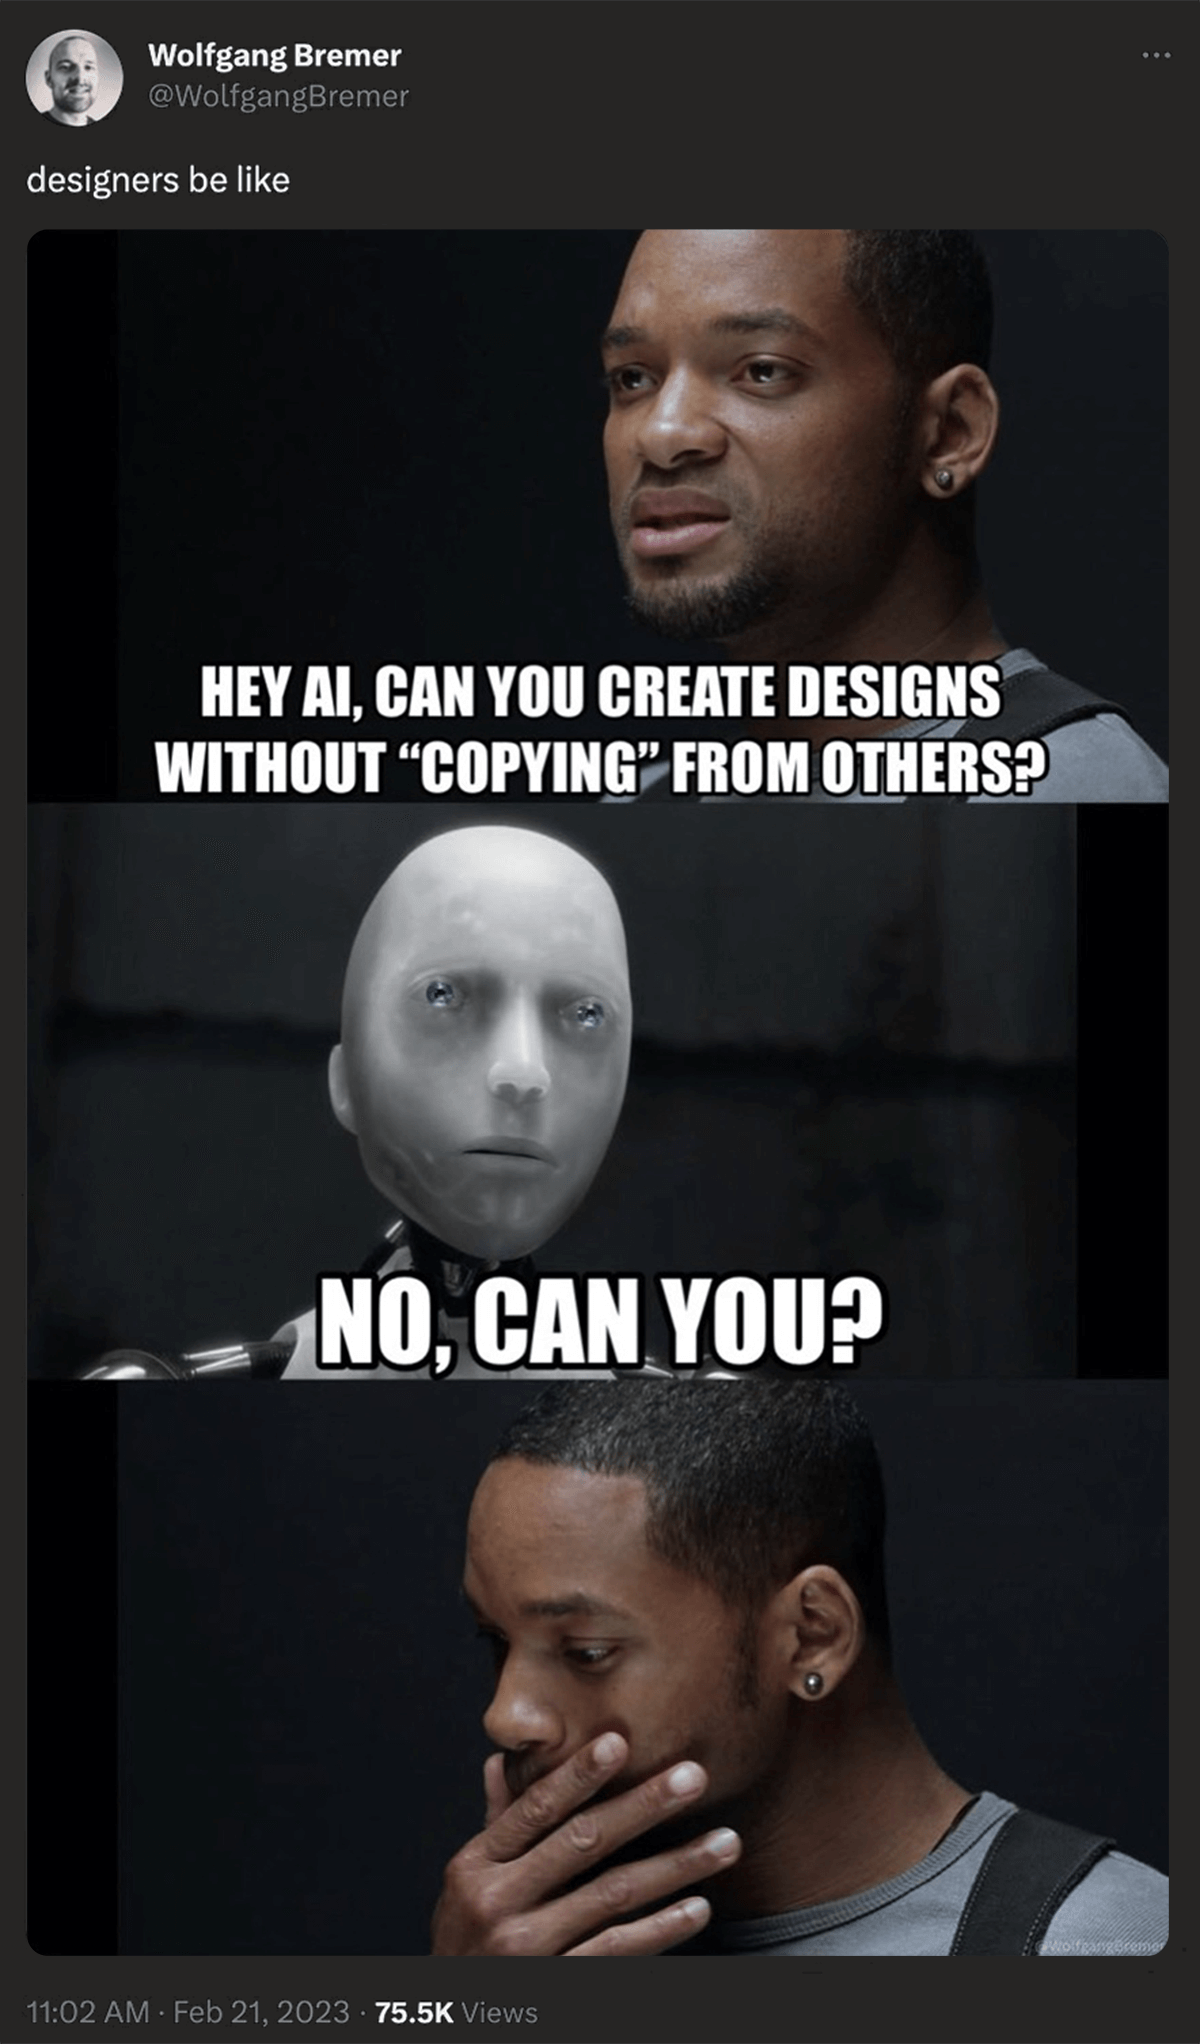 @WolfgangBremer on twitter: designers be like - Will Smith from I, Robot saying Hey AI, can you create designs without Copying from others? the robot responding no, can you?